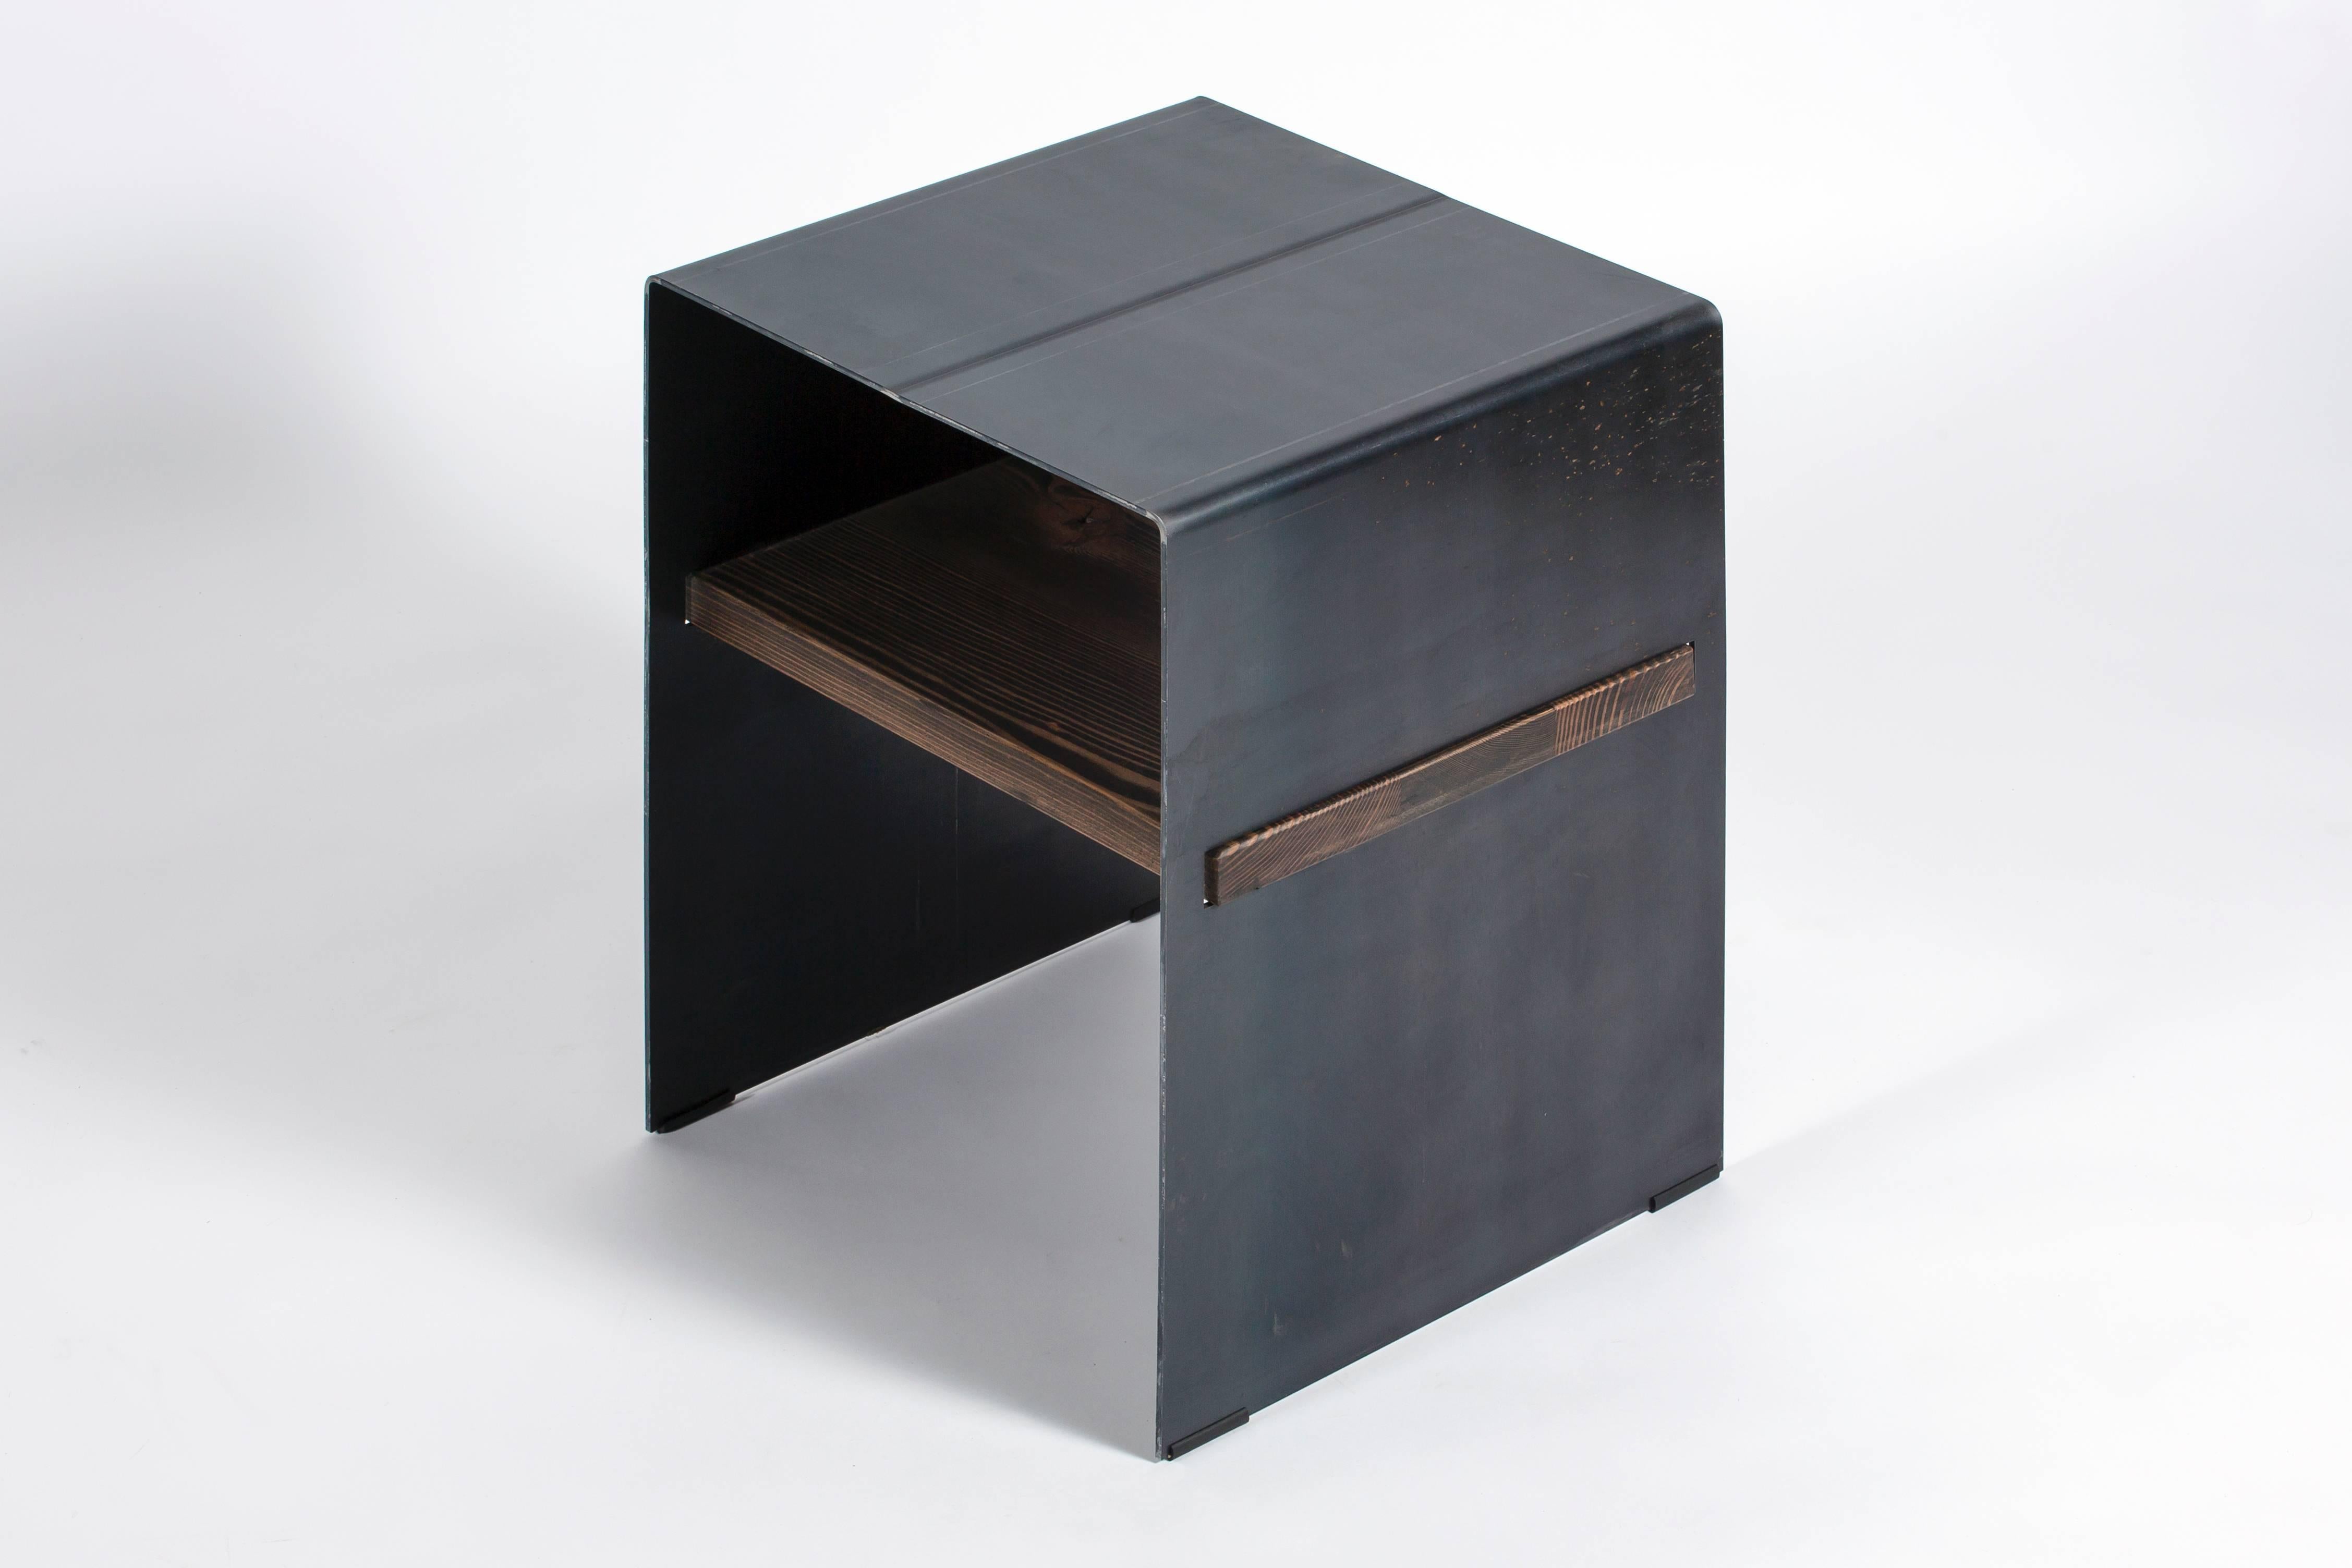 Contemporary and rustic all in one side table. Use the wooden inlay shelf for displays or storage.